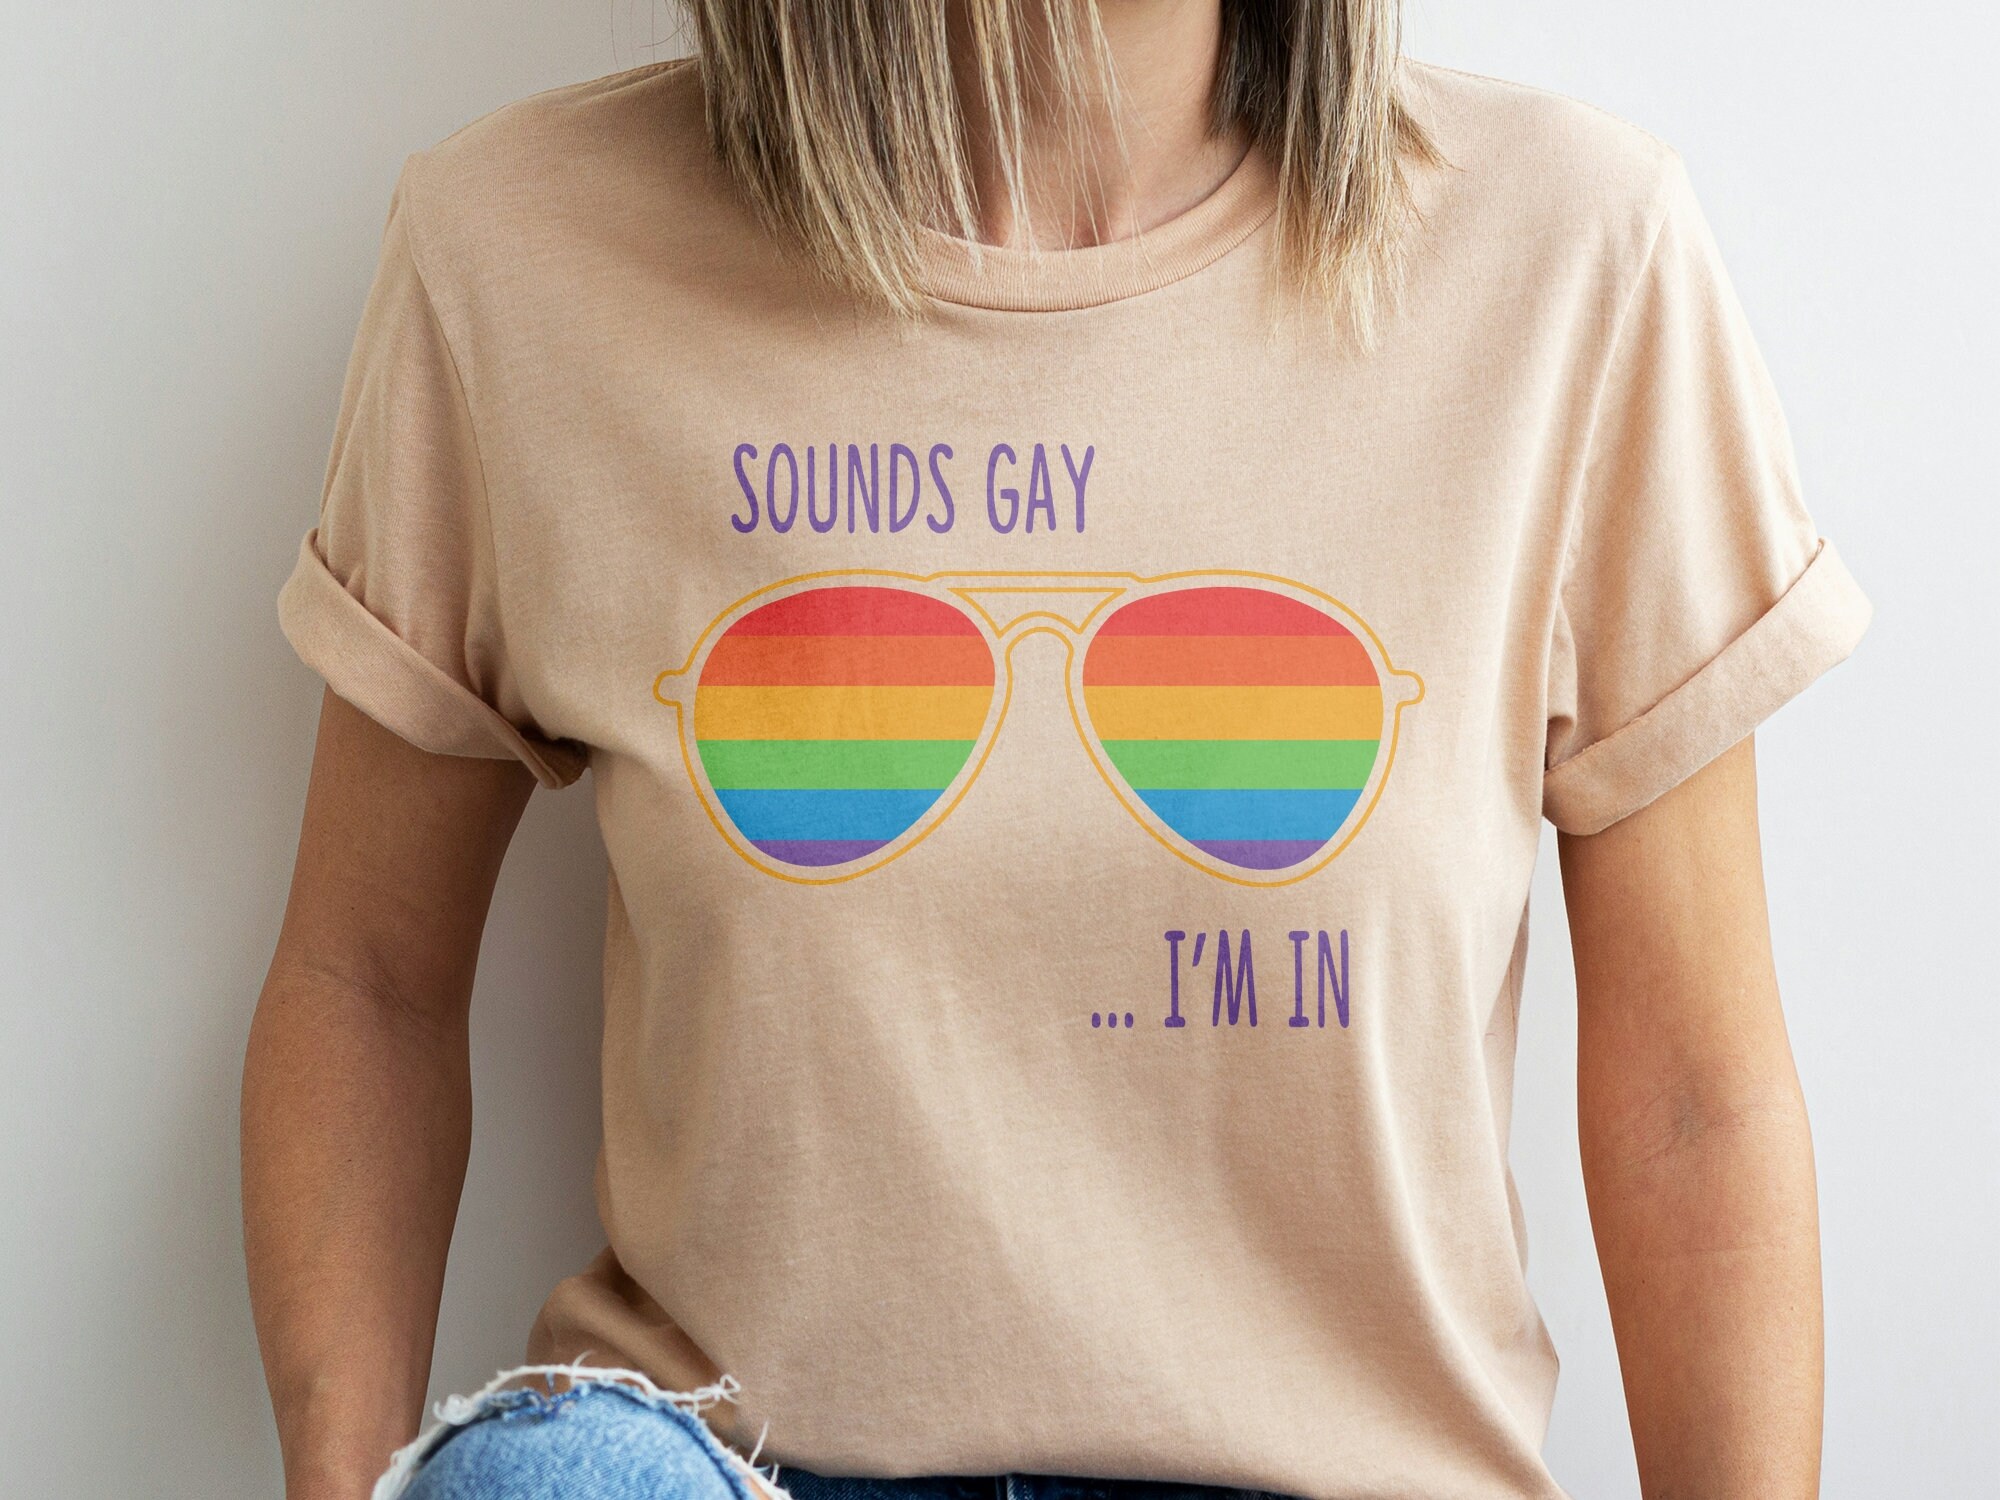 Discover Sounds Gay I'm In Shirt, Funny Gay Pride Shirt, Unisex Rainbow TShirt